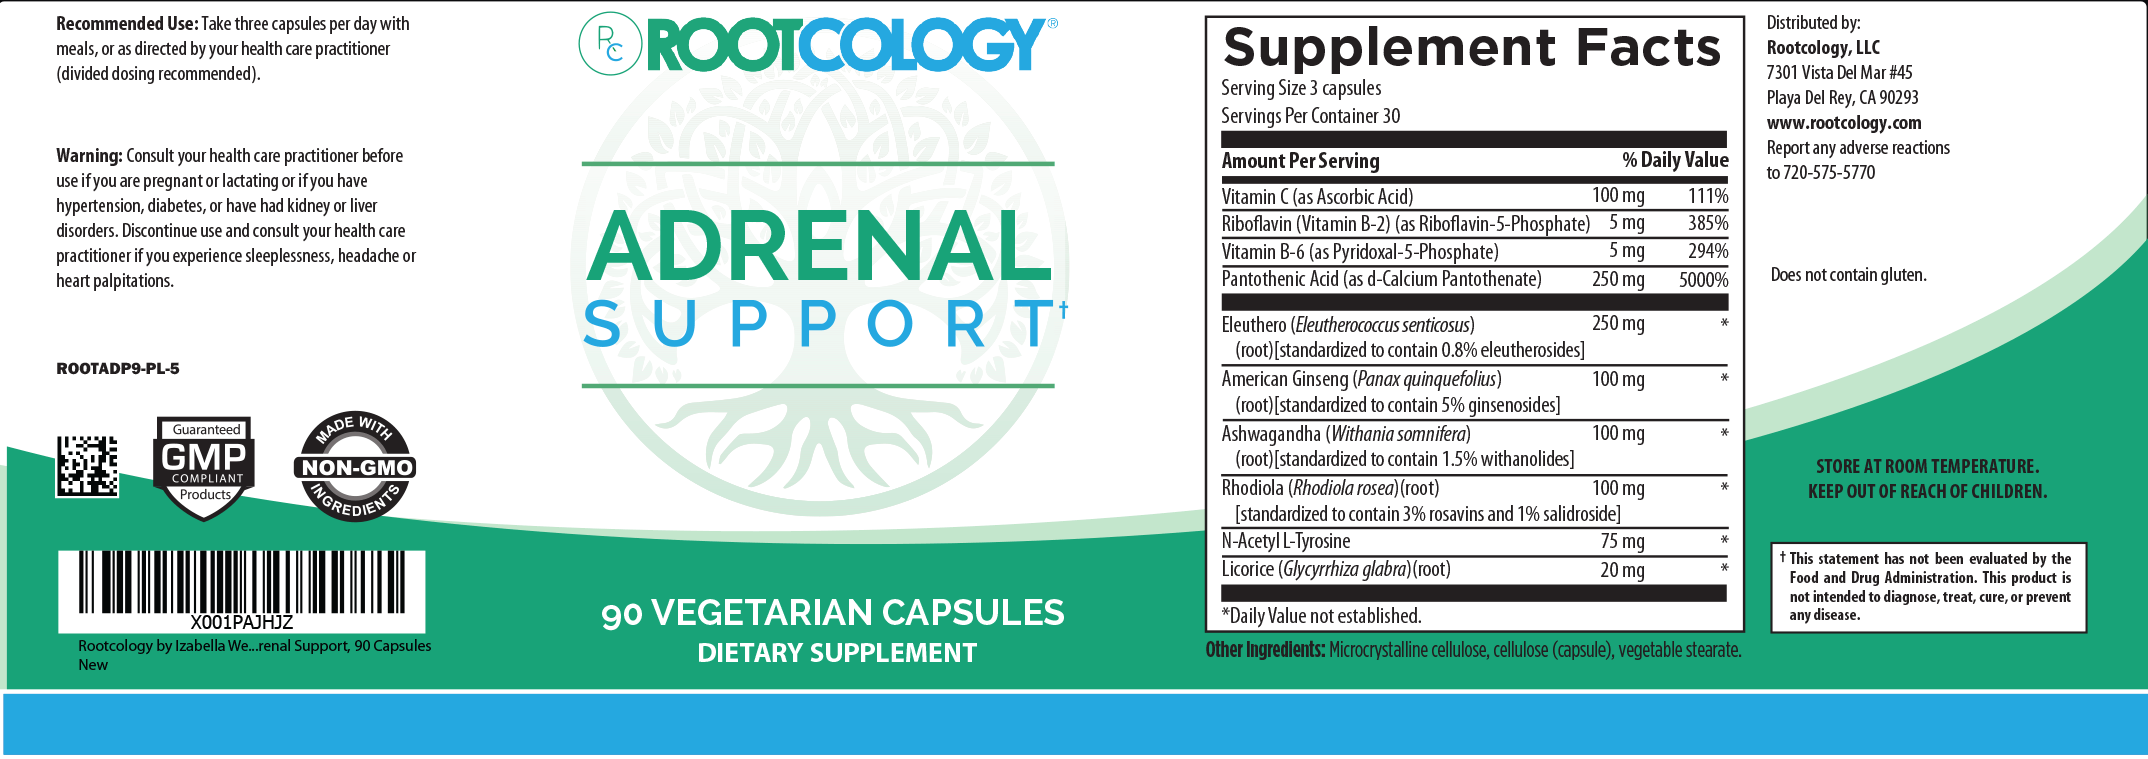 Rootcology Adrenal Support Supplement Label